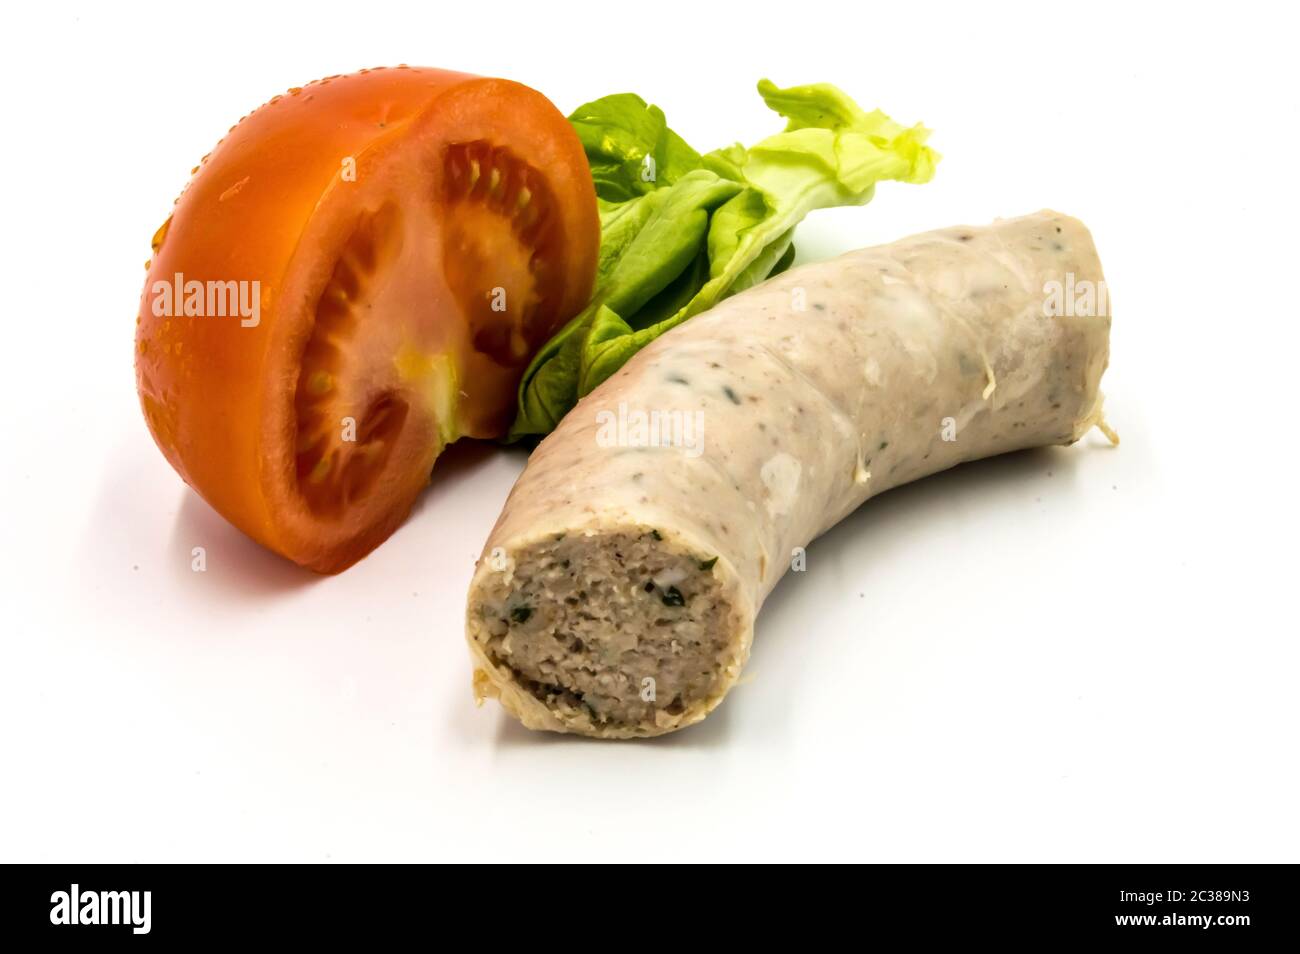 Piece of white sausage on a white background with half a tomato and a salad leaf Stock Photo